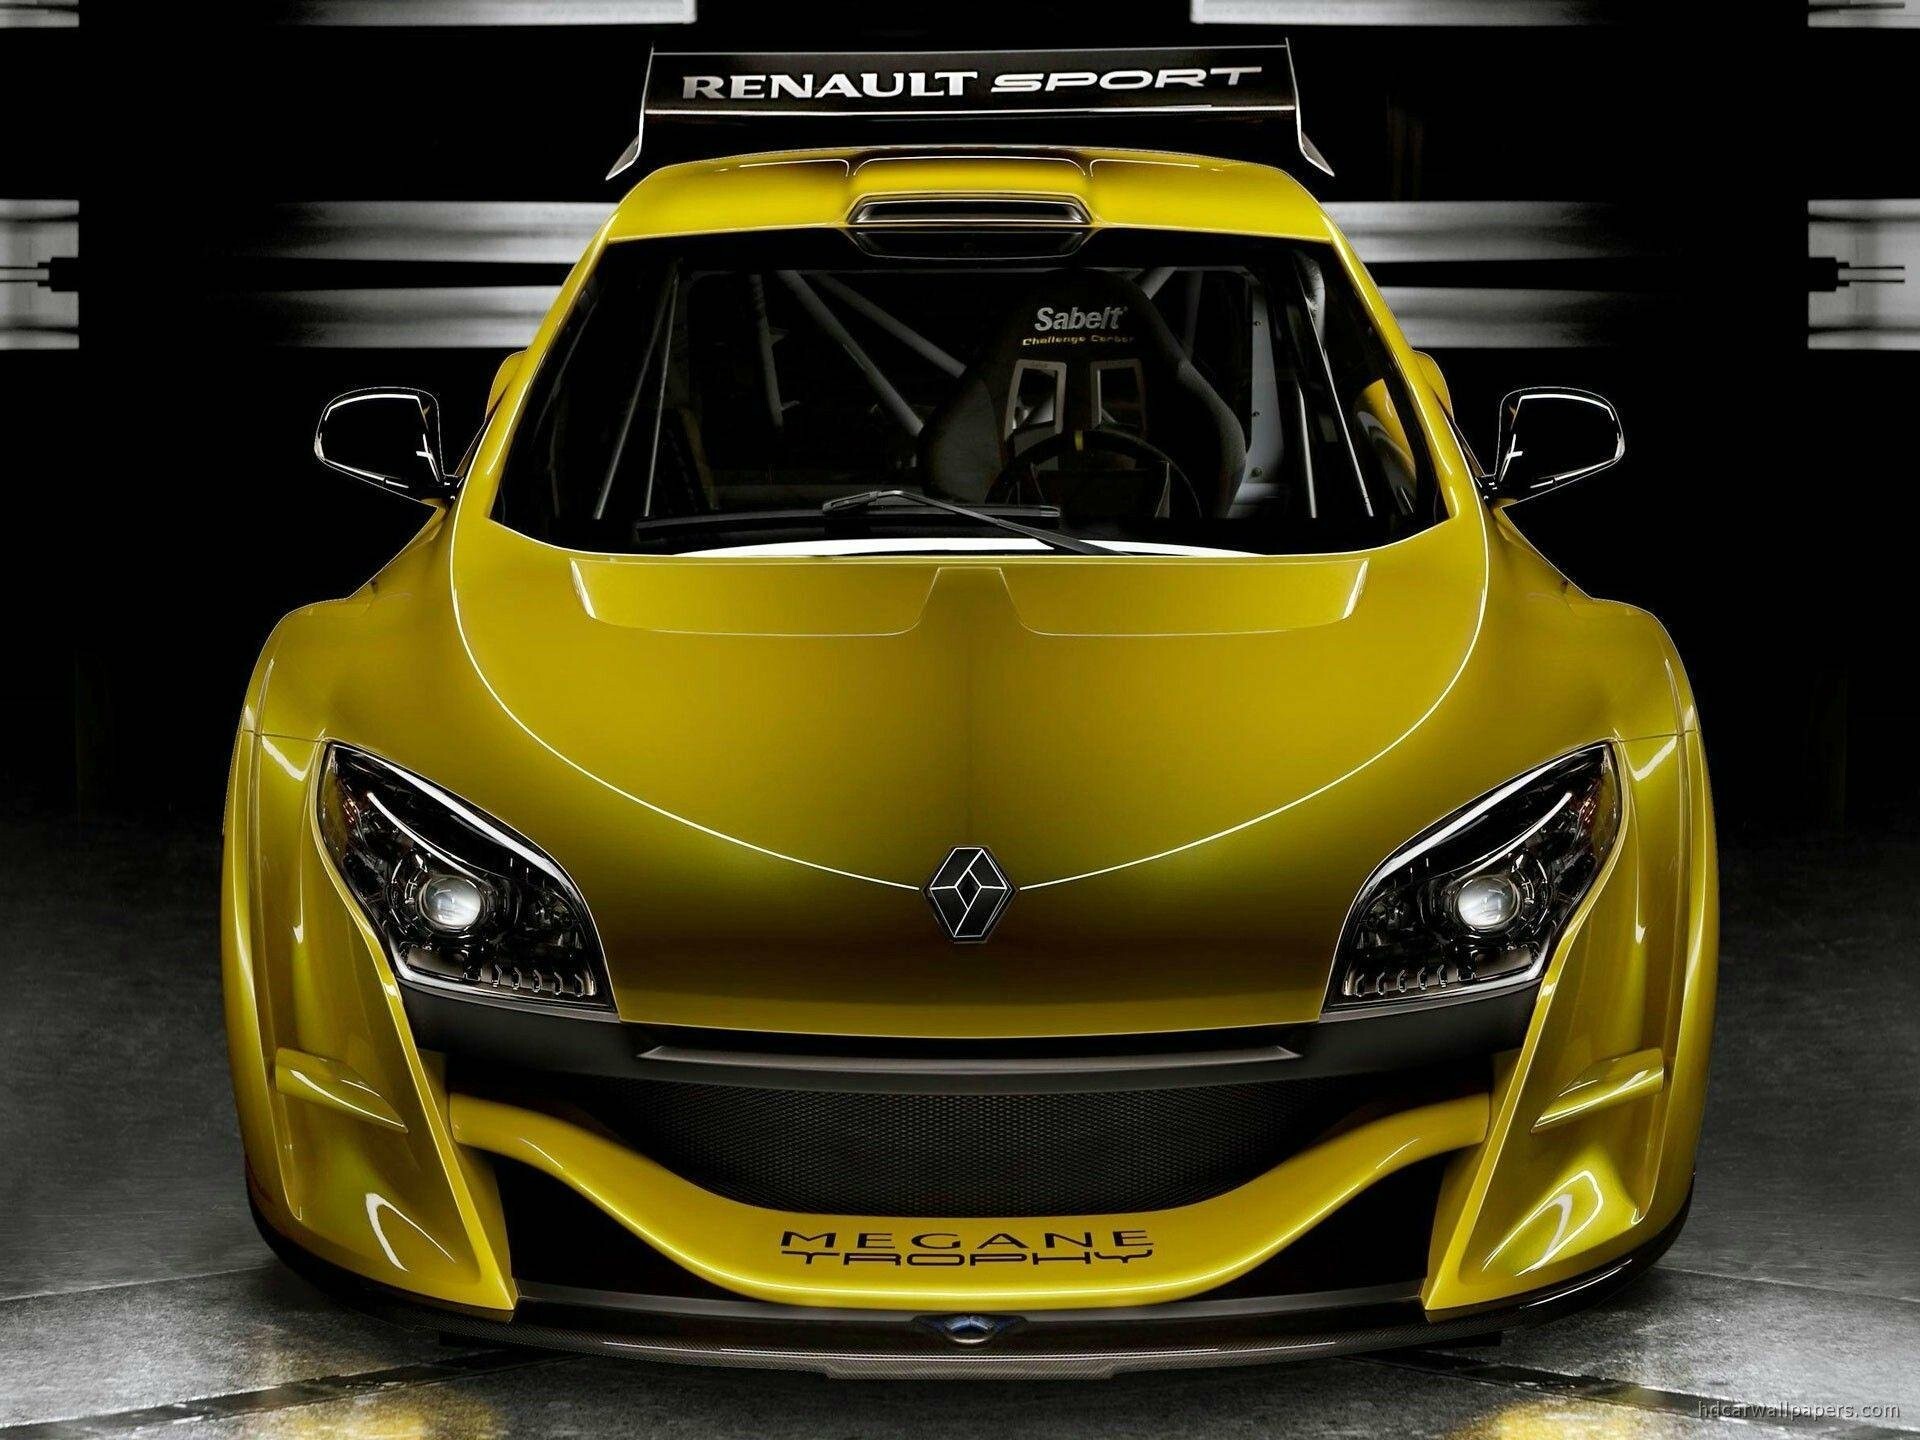 Renault: A French company that produces cars, Megane. 1920x1440 HD Background.